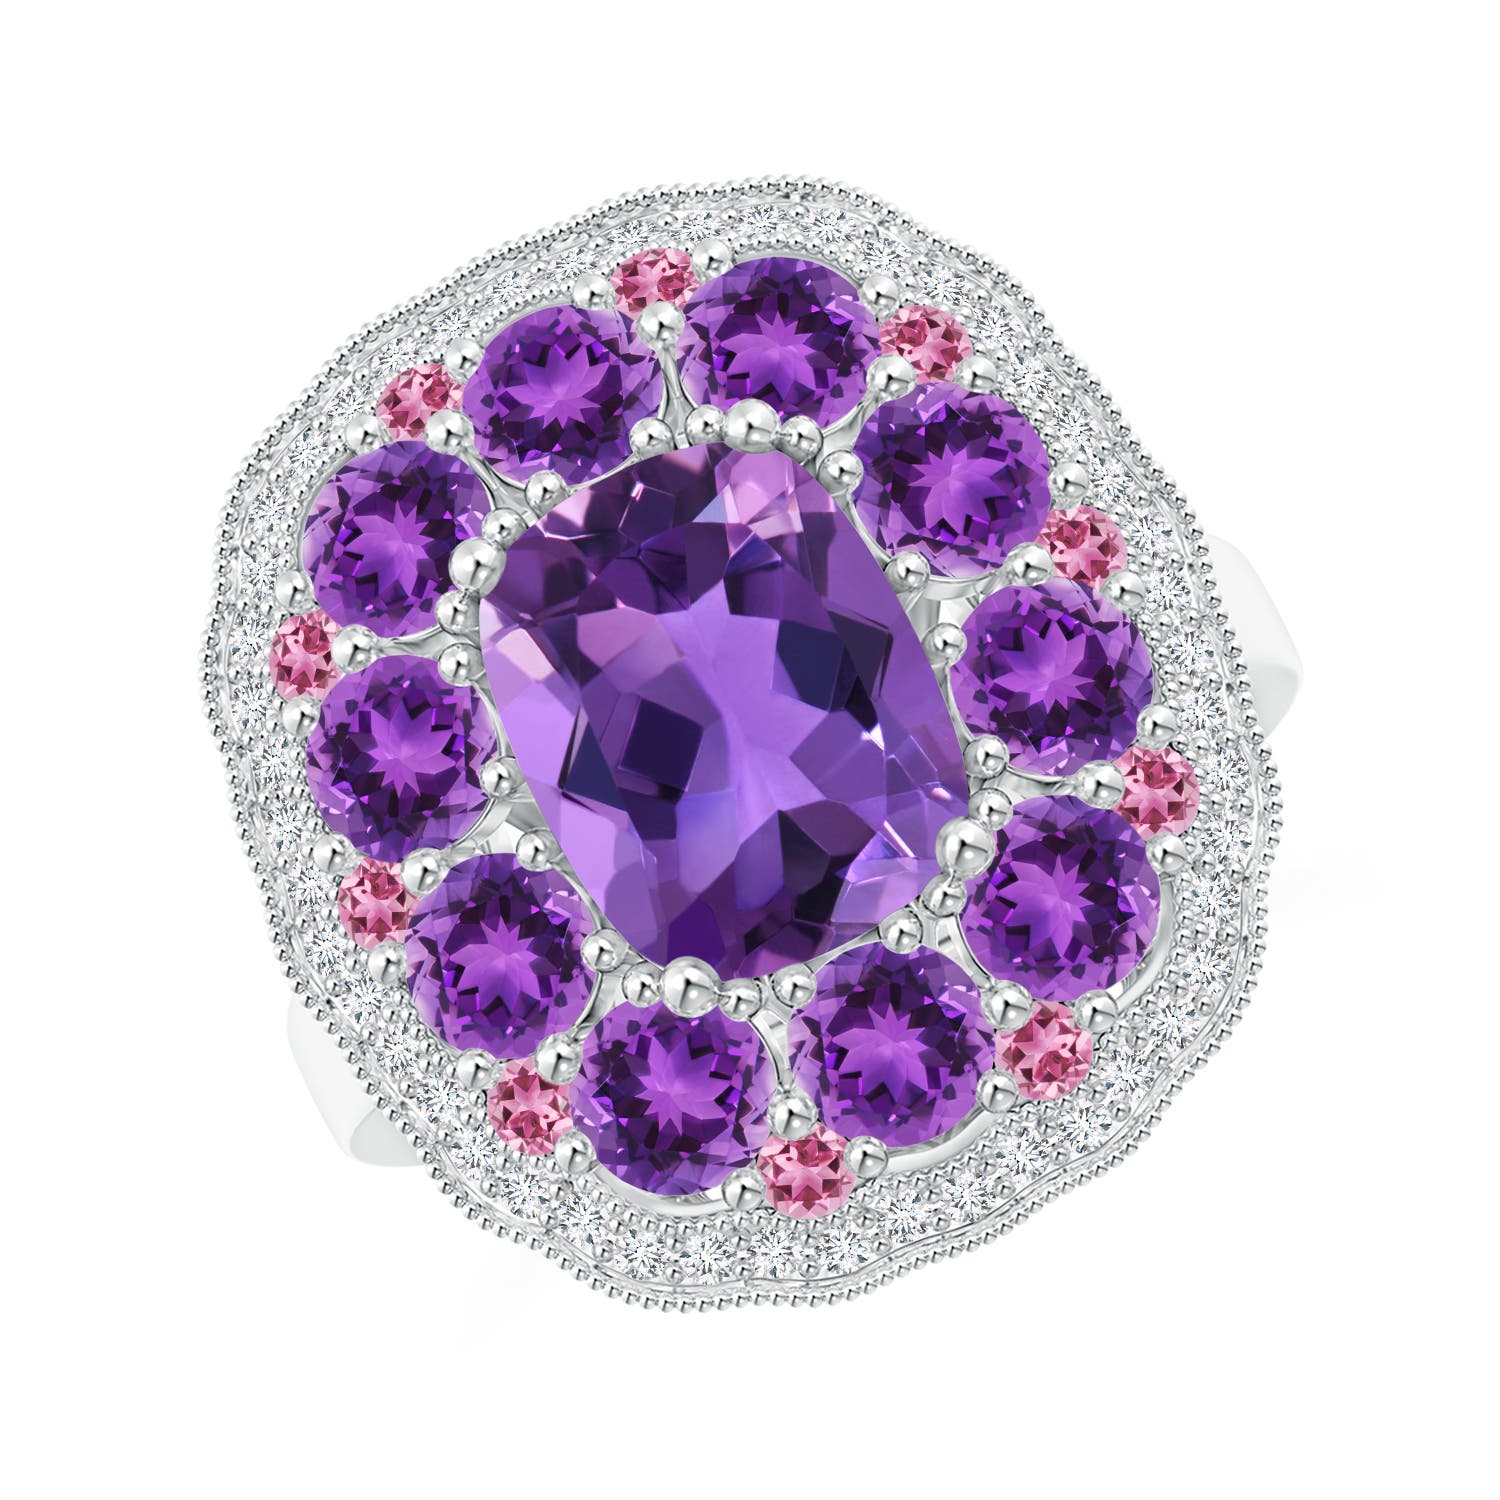 AAA - Amethyst / 4.12 CT / 14 KT White Gold